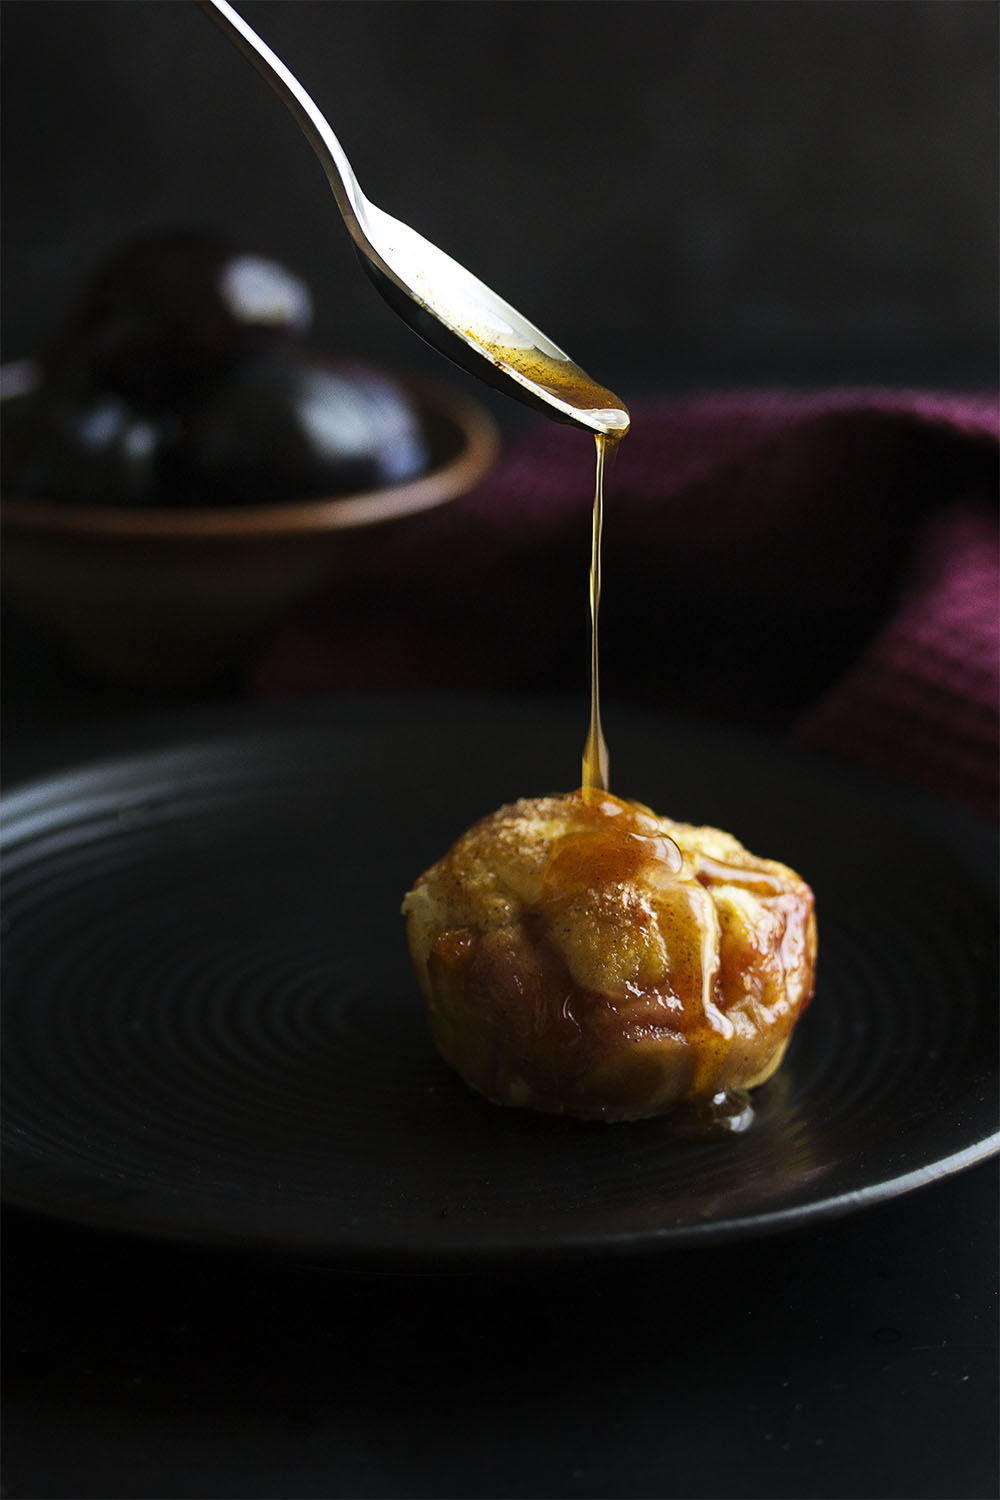 Pull out your muffin tin for easy clean up and wrap plum slices and spiced honey in puff pastry to make these puff pastry plum tarts. Bake until they are puffed and golden, then drizzle with a little more spiced honey, and serve with mascarpone whipped cream. | justalittlebitofbacon.com